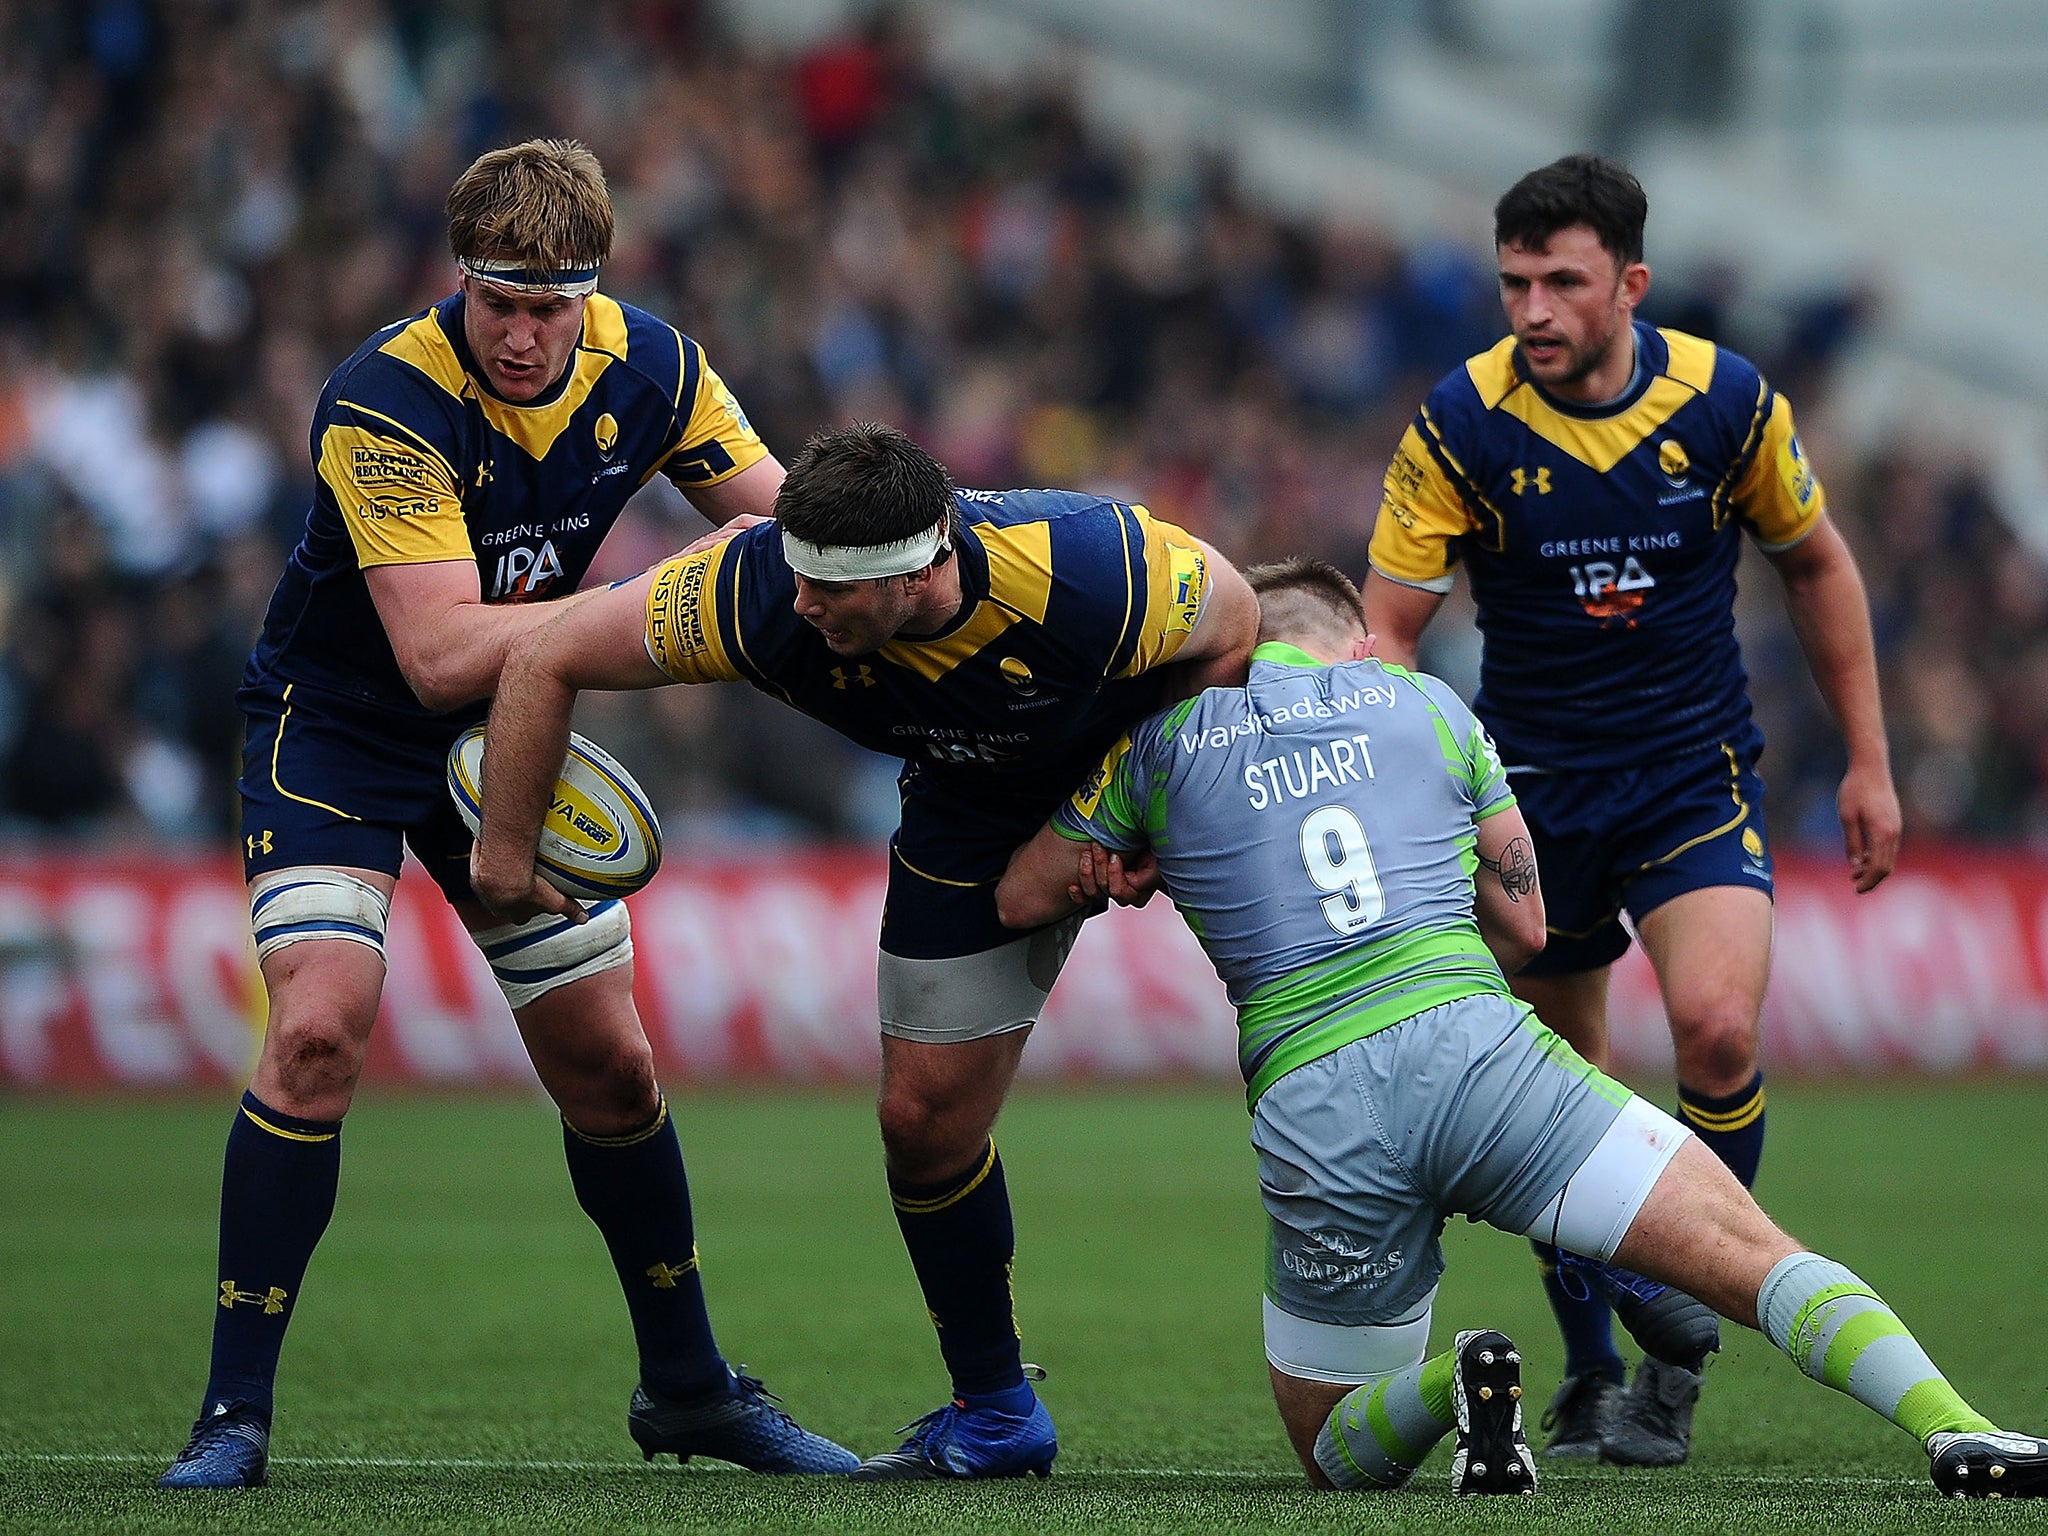 Ryan Bower flicks the ball out the back of his hand as Worcester attack